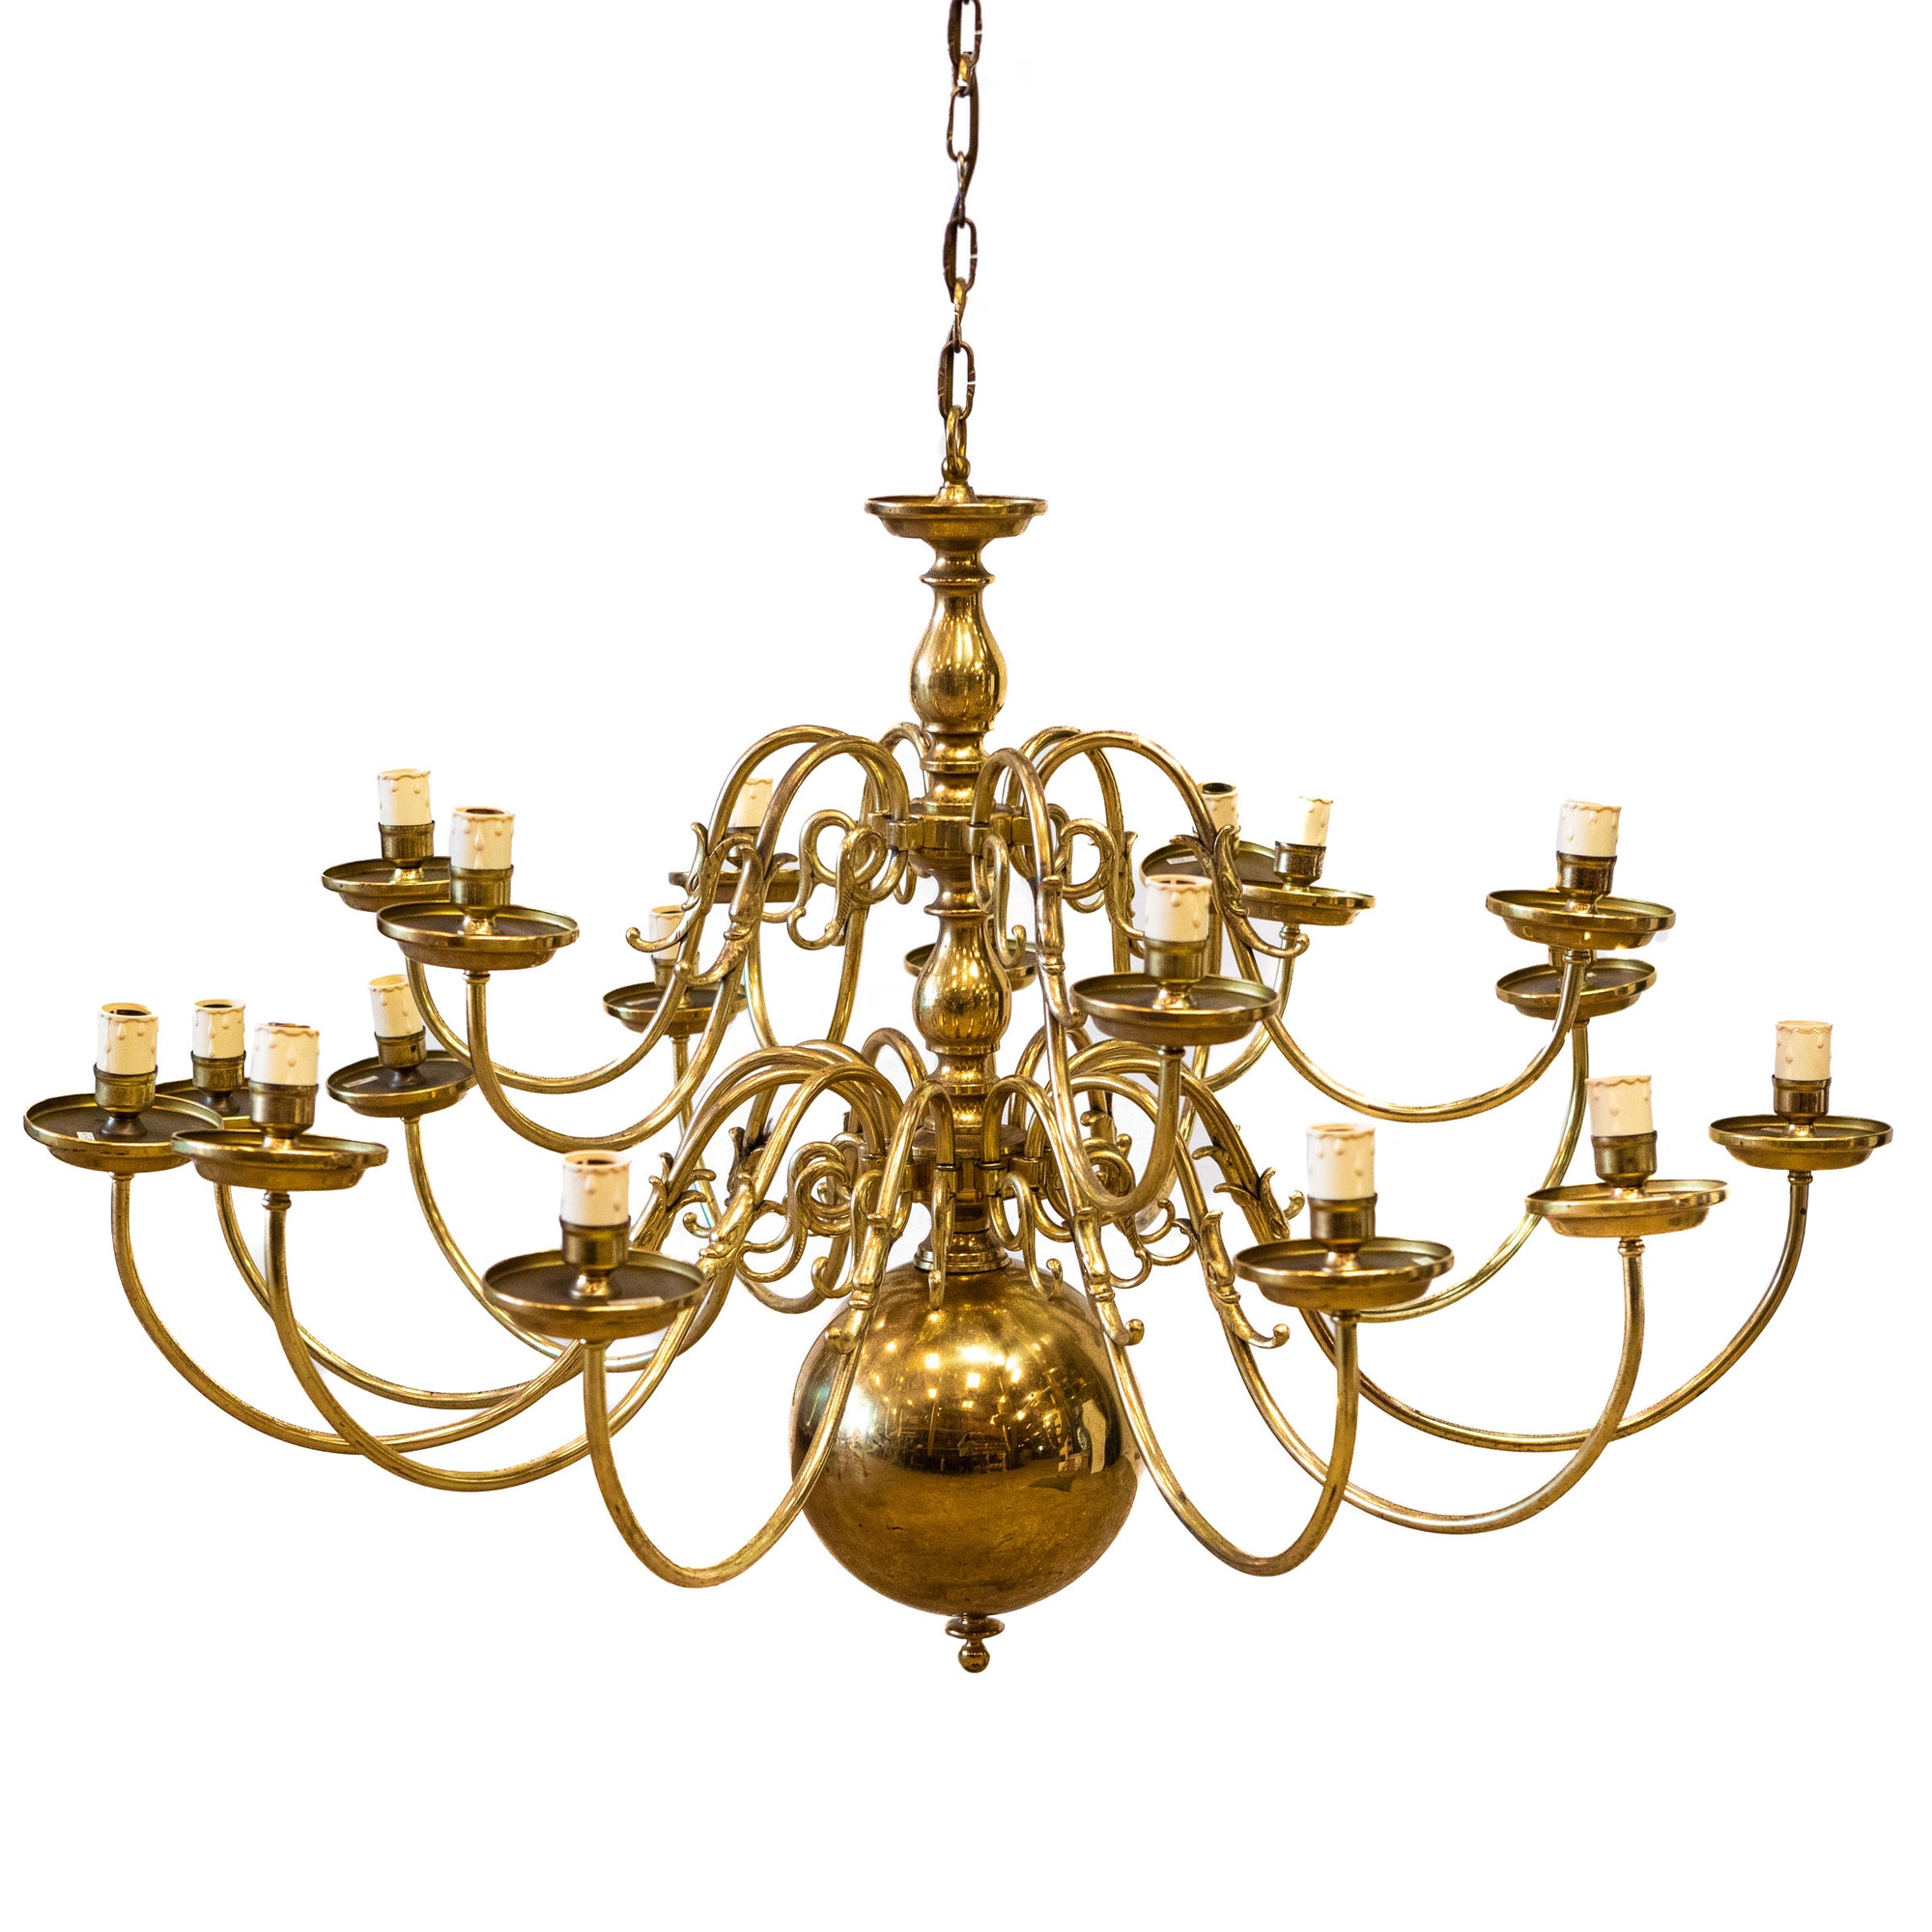 Antique Reclaimed Large Brass Chandelier | 18 Arm | The Architectural Forum